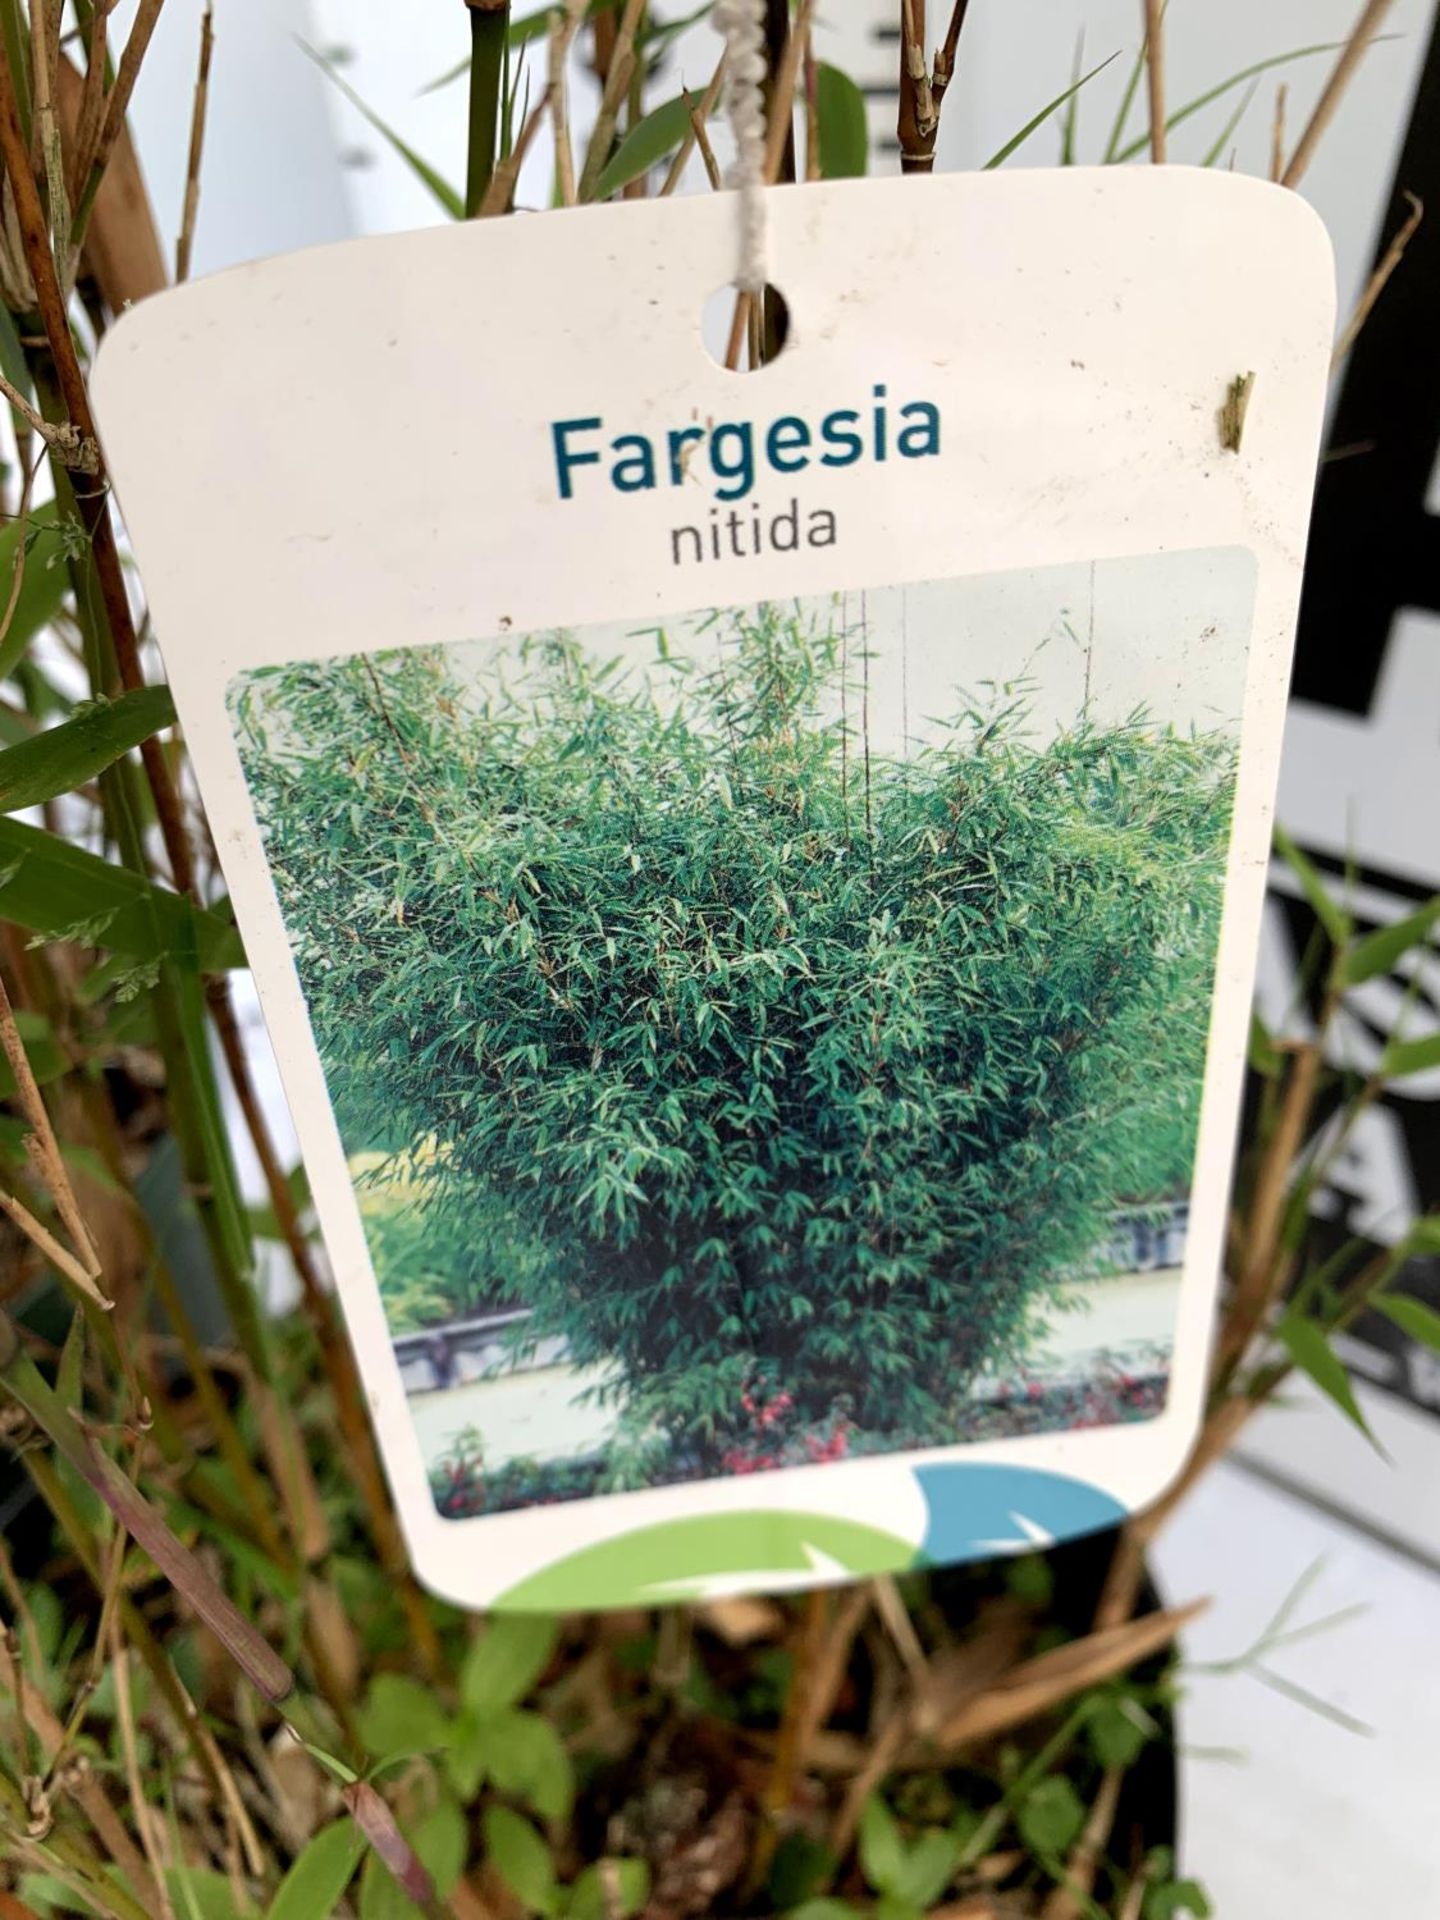 TWO BAMBOO FARGESIA 'NITIDA' APPROX 120CM IN HEIGHT IN 4 LTR POTS PLUS VAT TO BE SOLD FOR THE TWO - Image 5 of 6